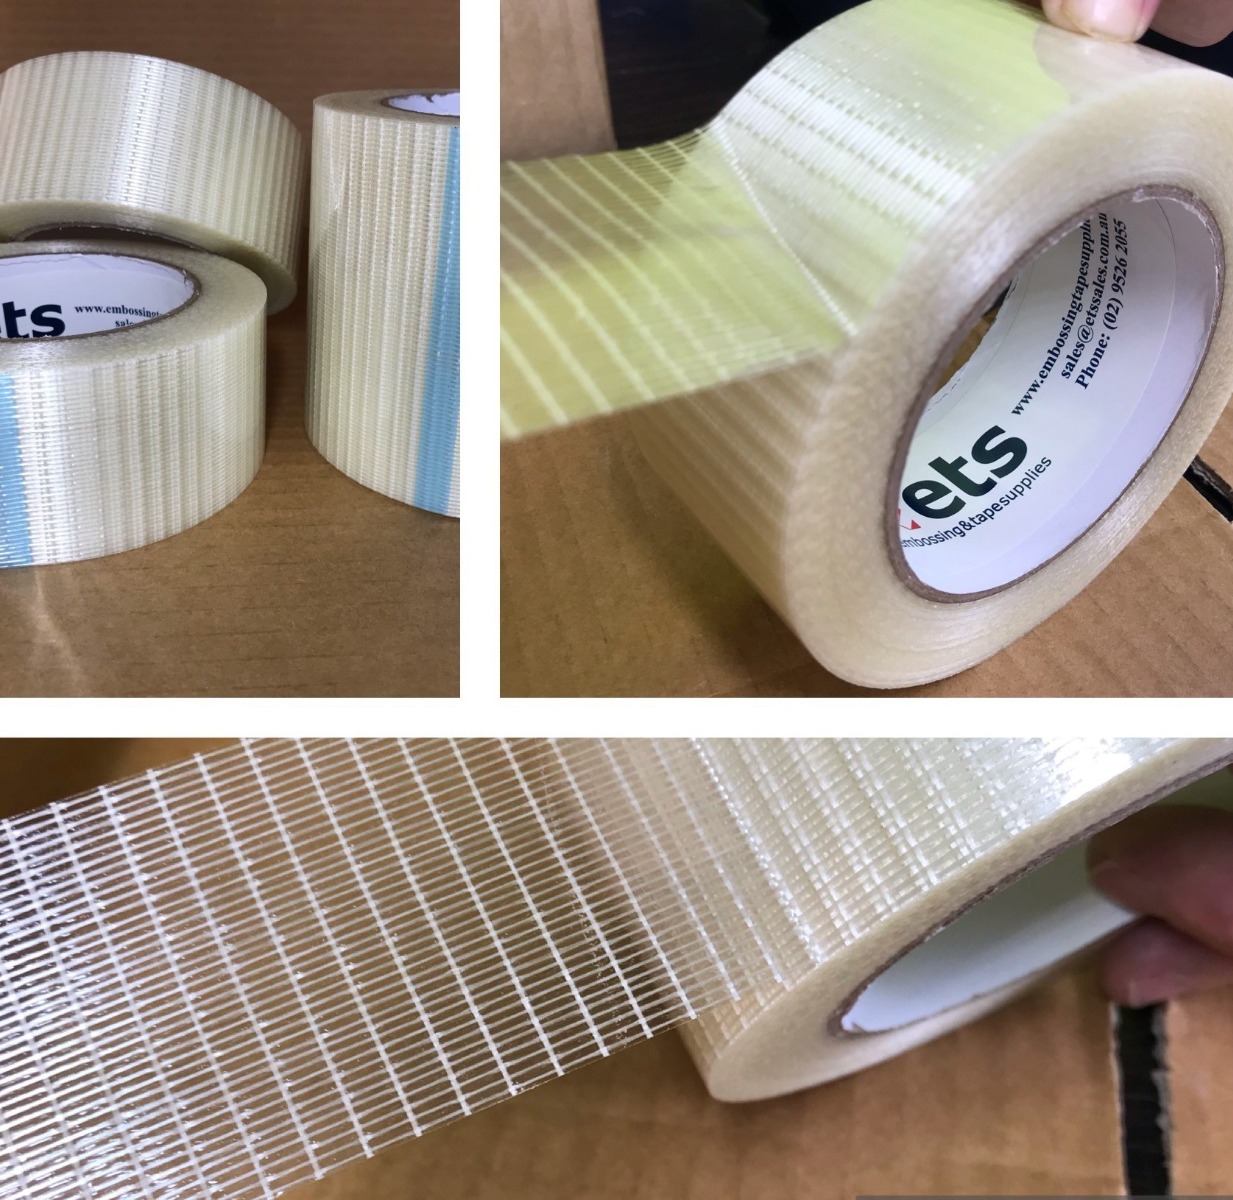 2 Way Filament Tape (Cross Weave Filament Tape) - Available Online Here For Australia Wide Delivery